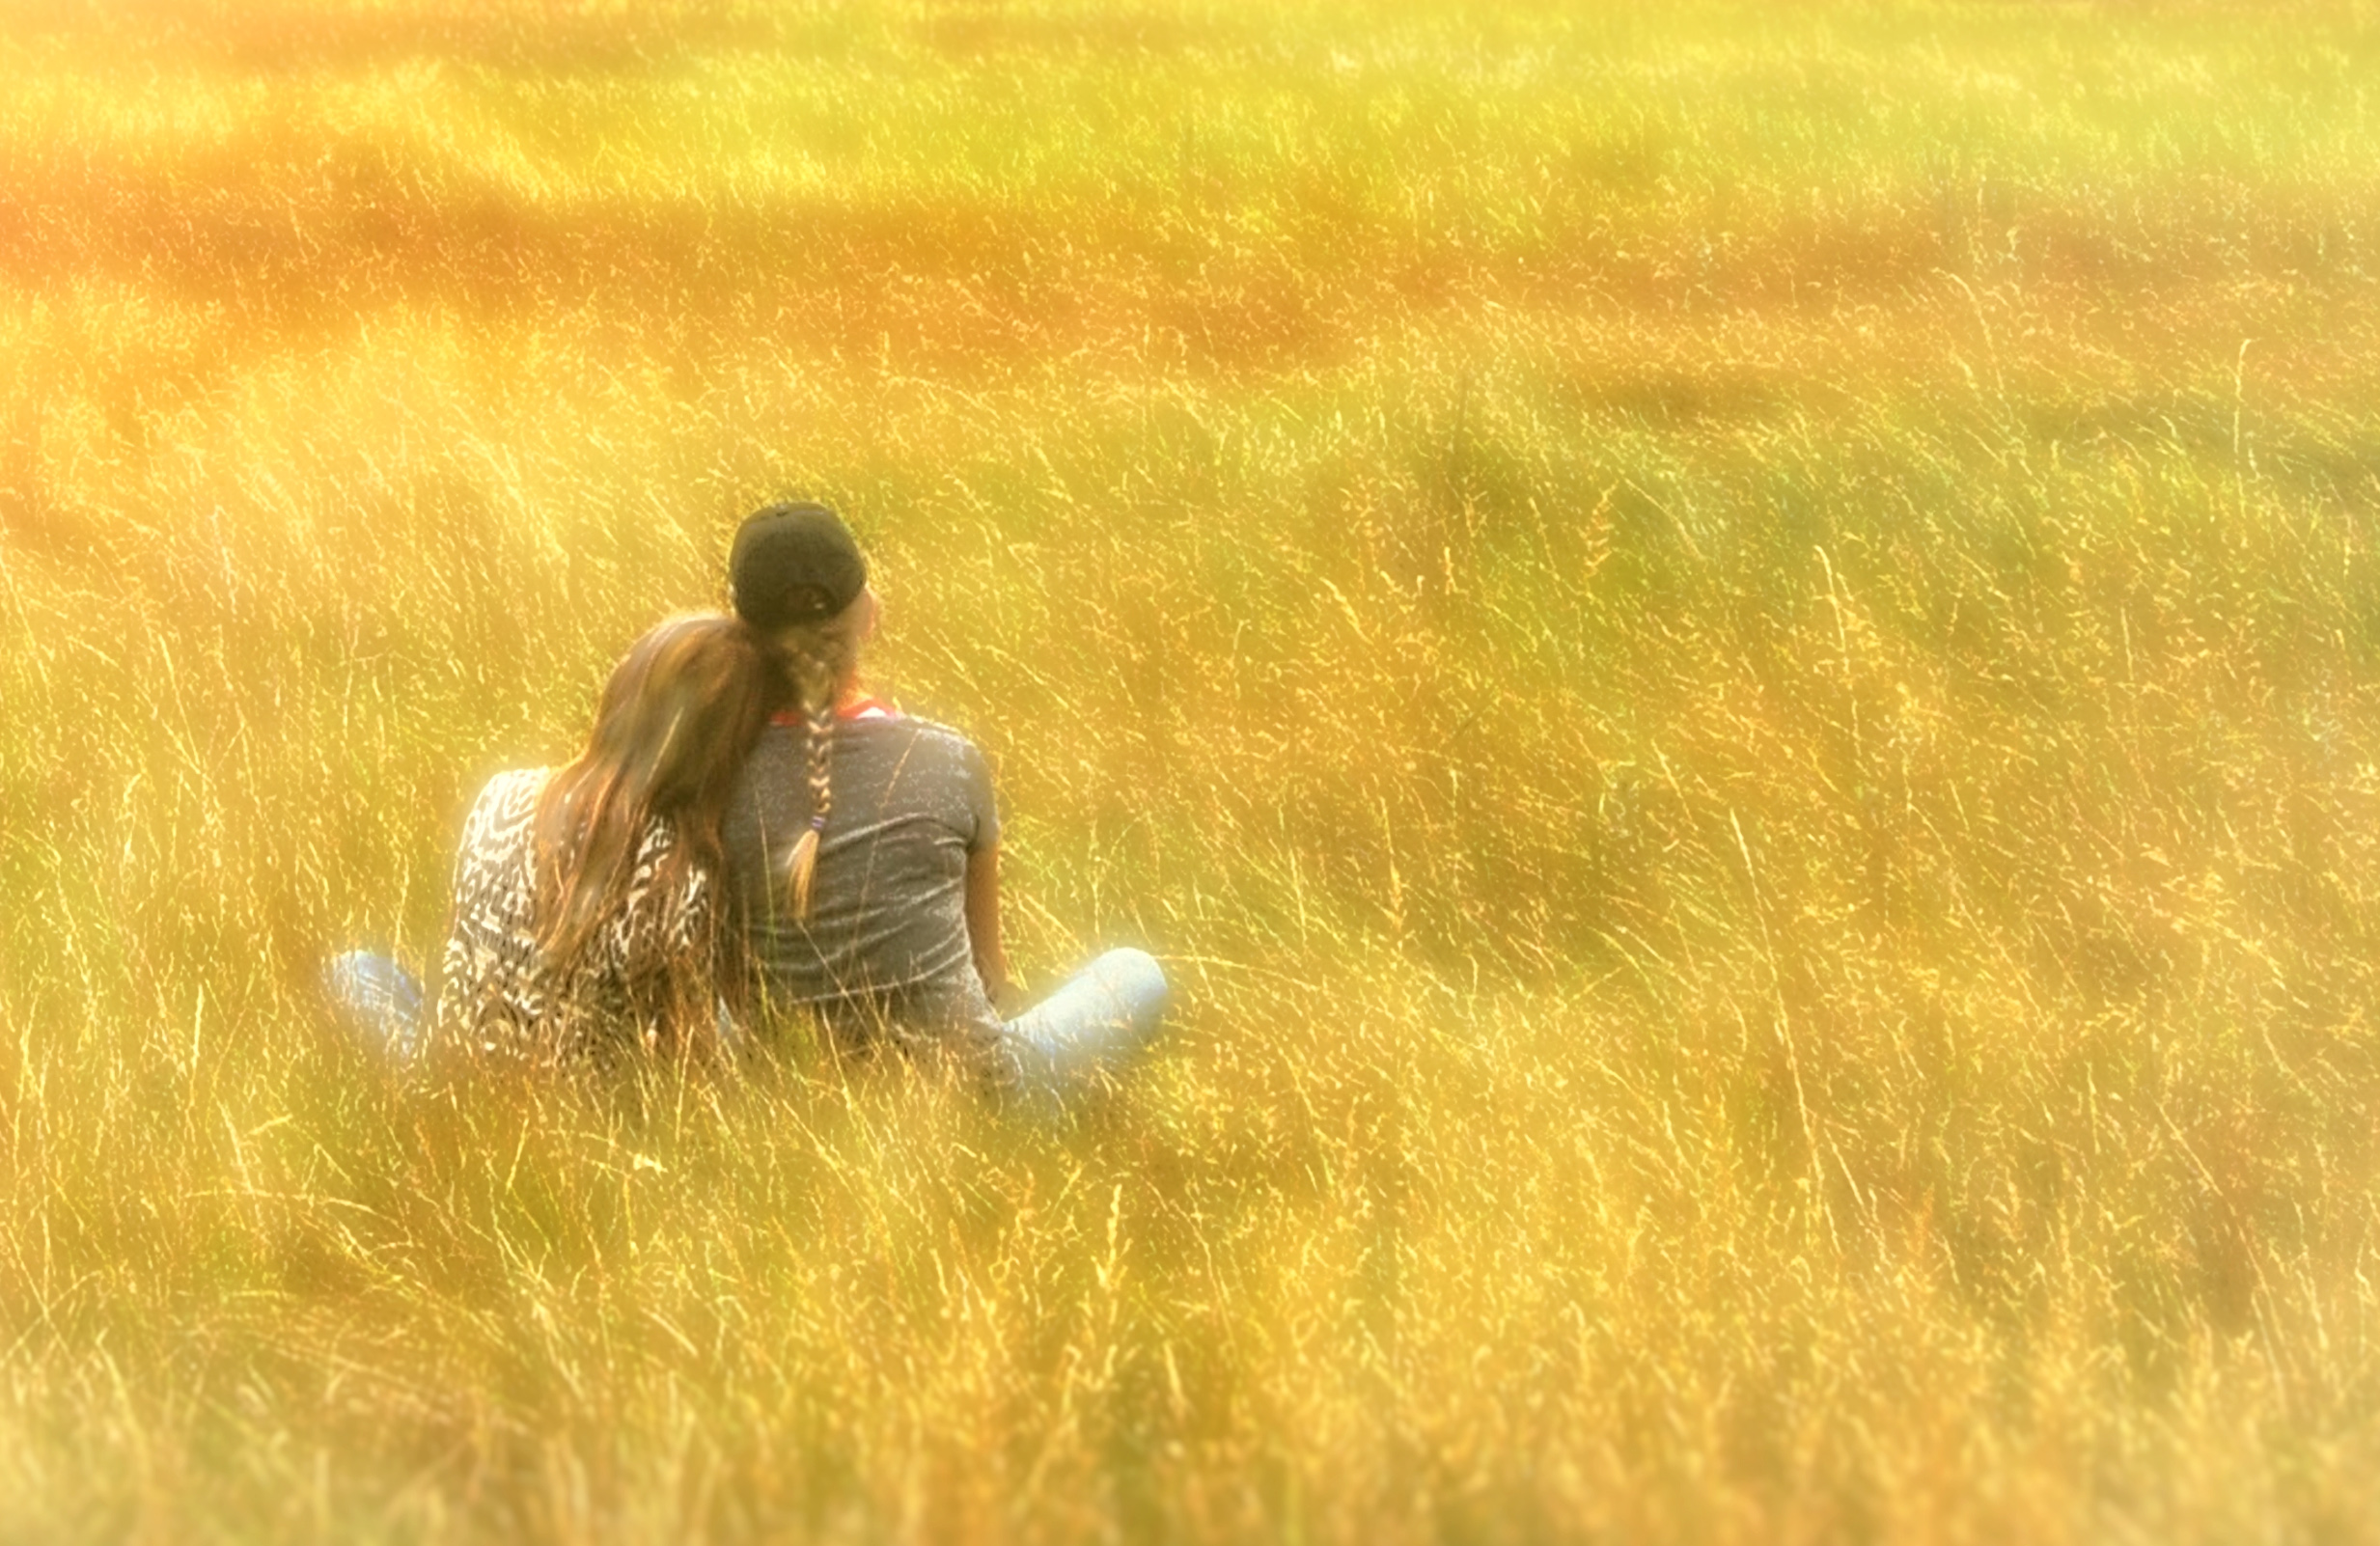 Hazy vintage looks - girls on the grass - with copyspace photo